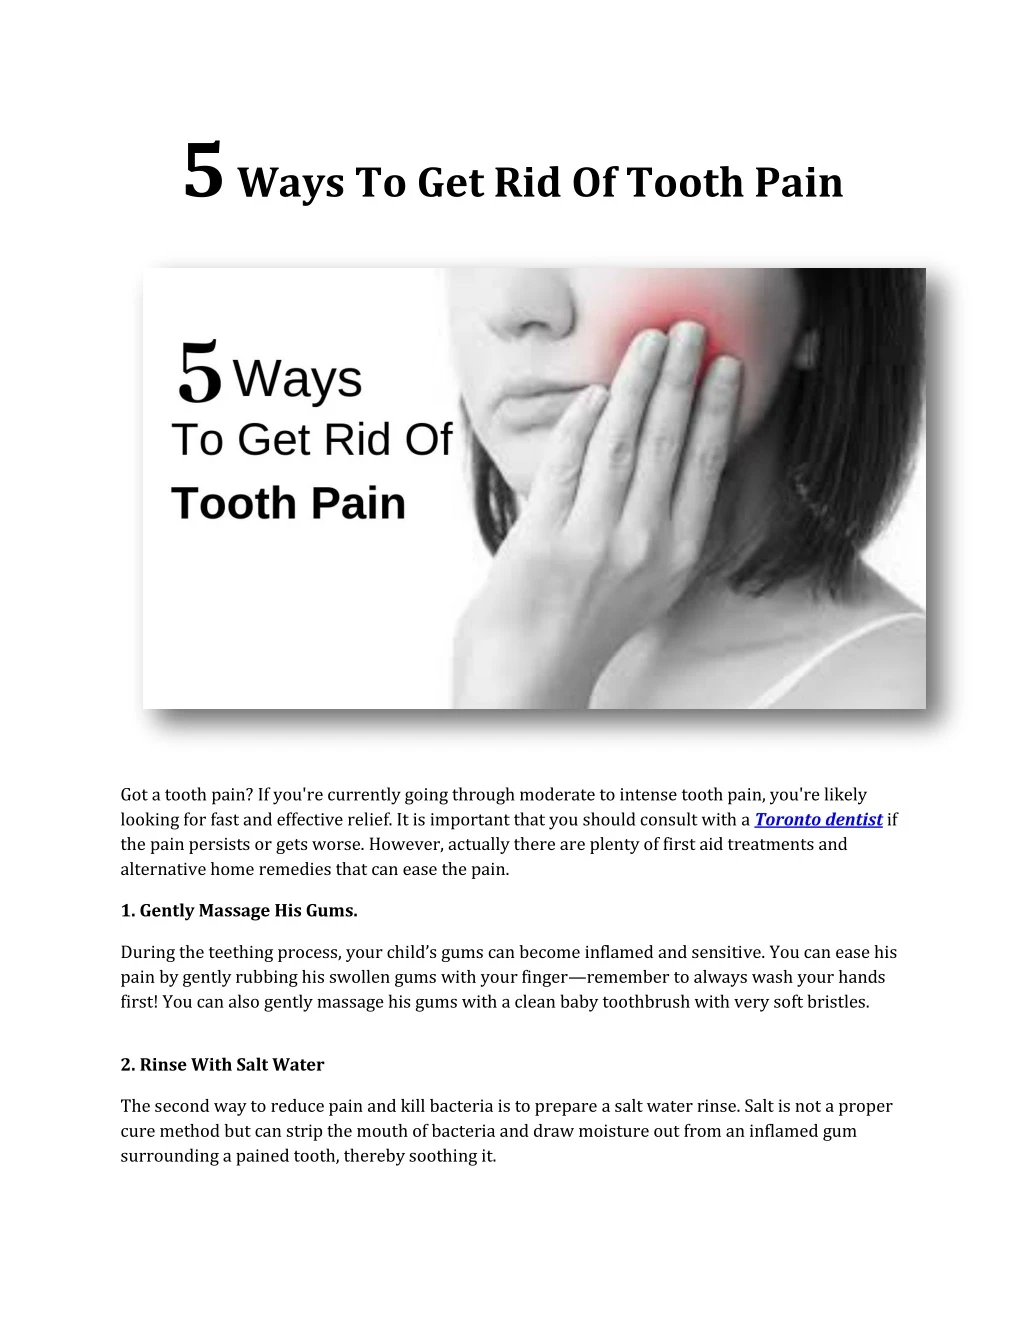 5 ways to get rid of tooth pain